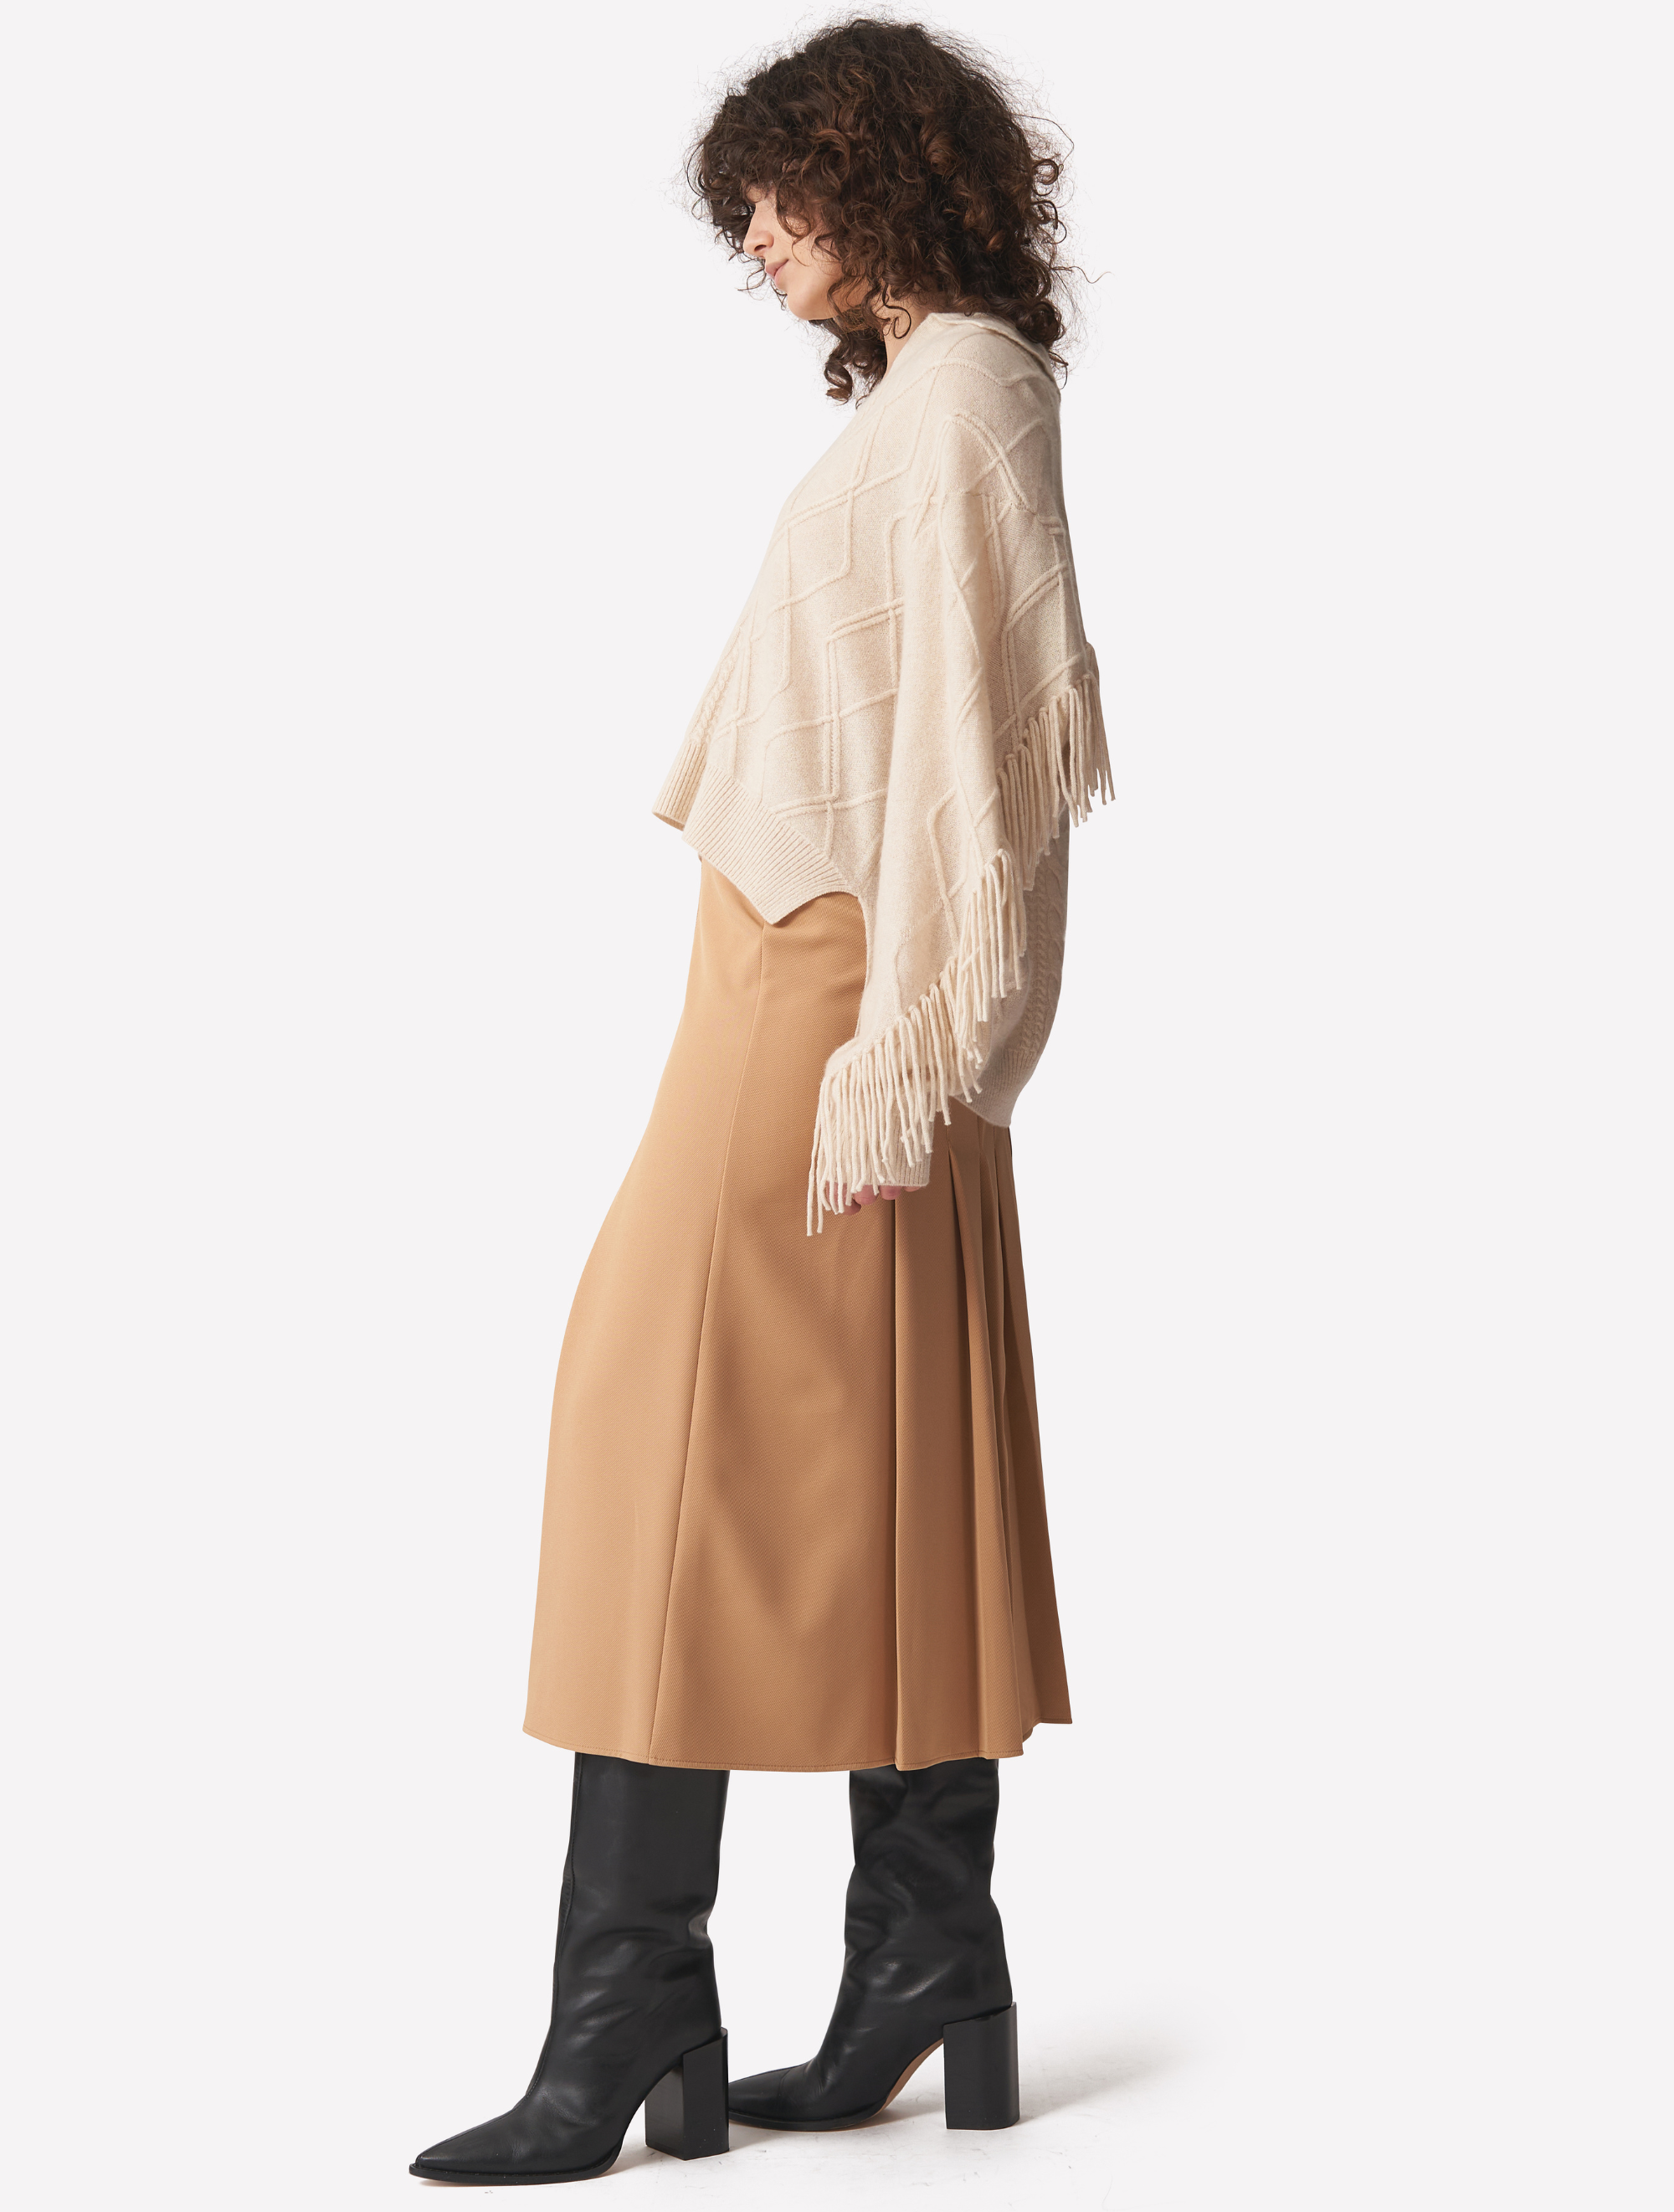 Ecru cashmere polo neck jumper with dropped shoulders cable knit and fringing details across arms and back